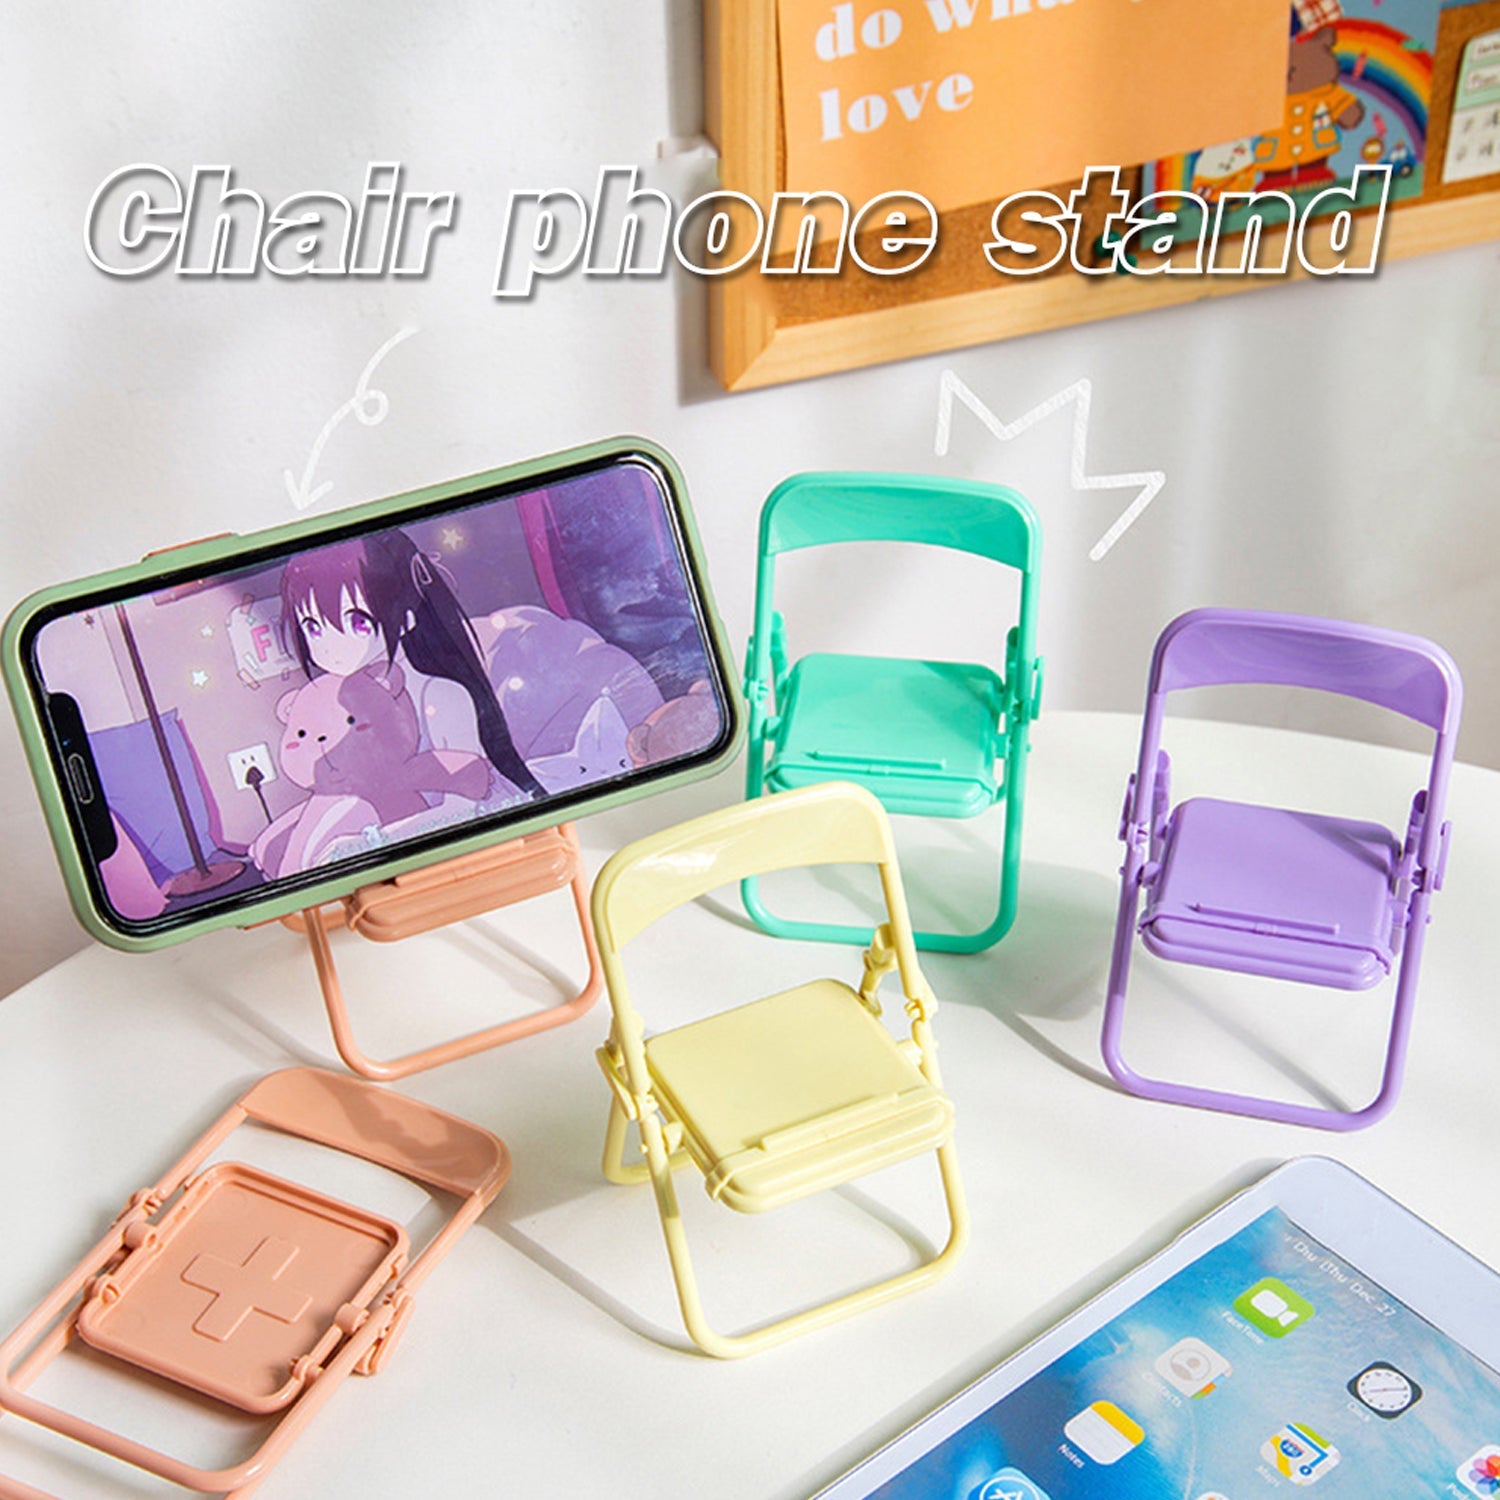 4797 1 Pc Chair Mobile Stand used in all kinds of household and official purposes as a stand and holder for mobiles and smartphones etc. DeoDap